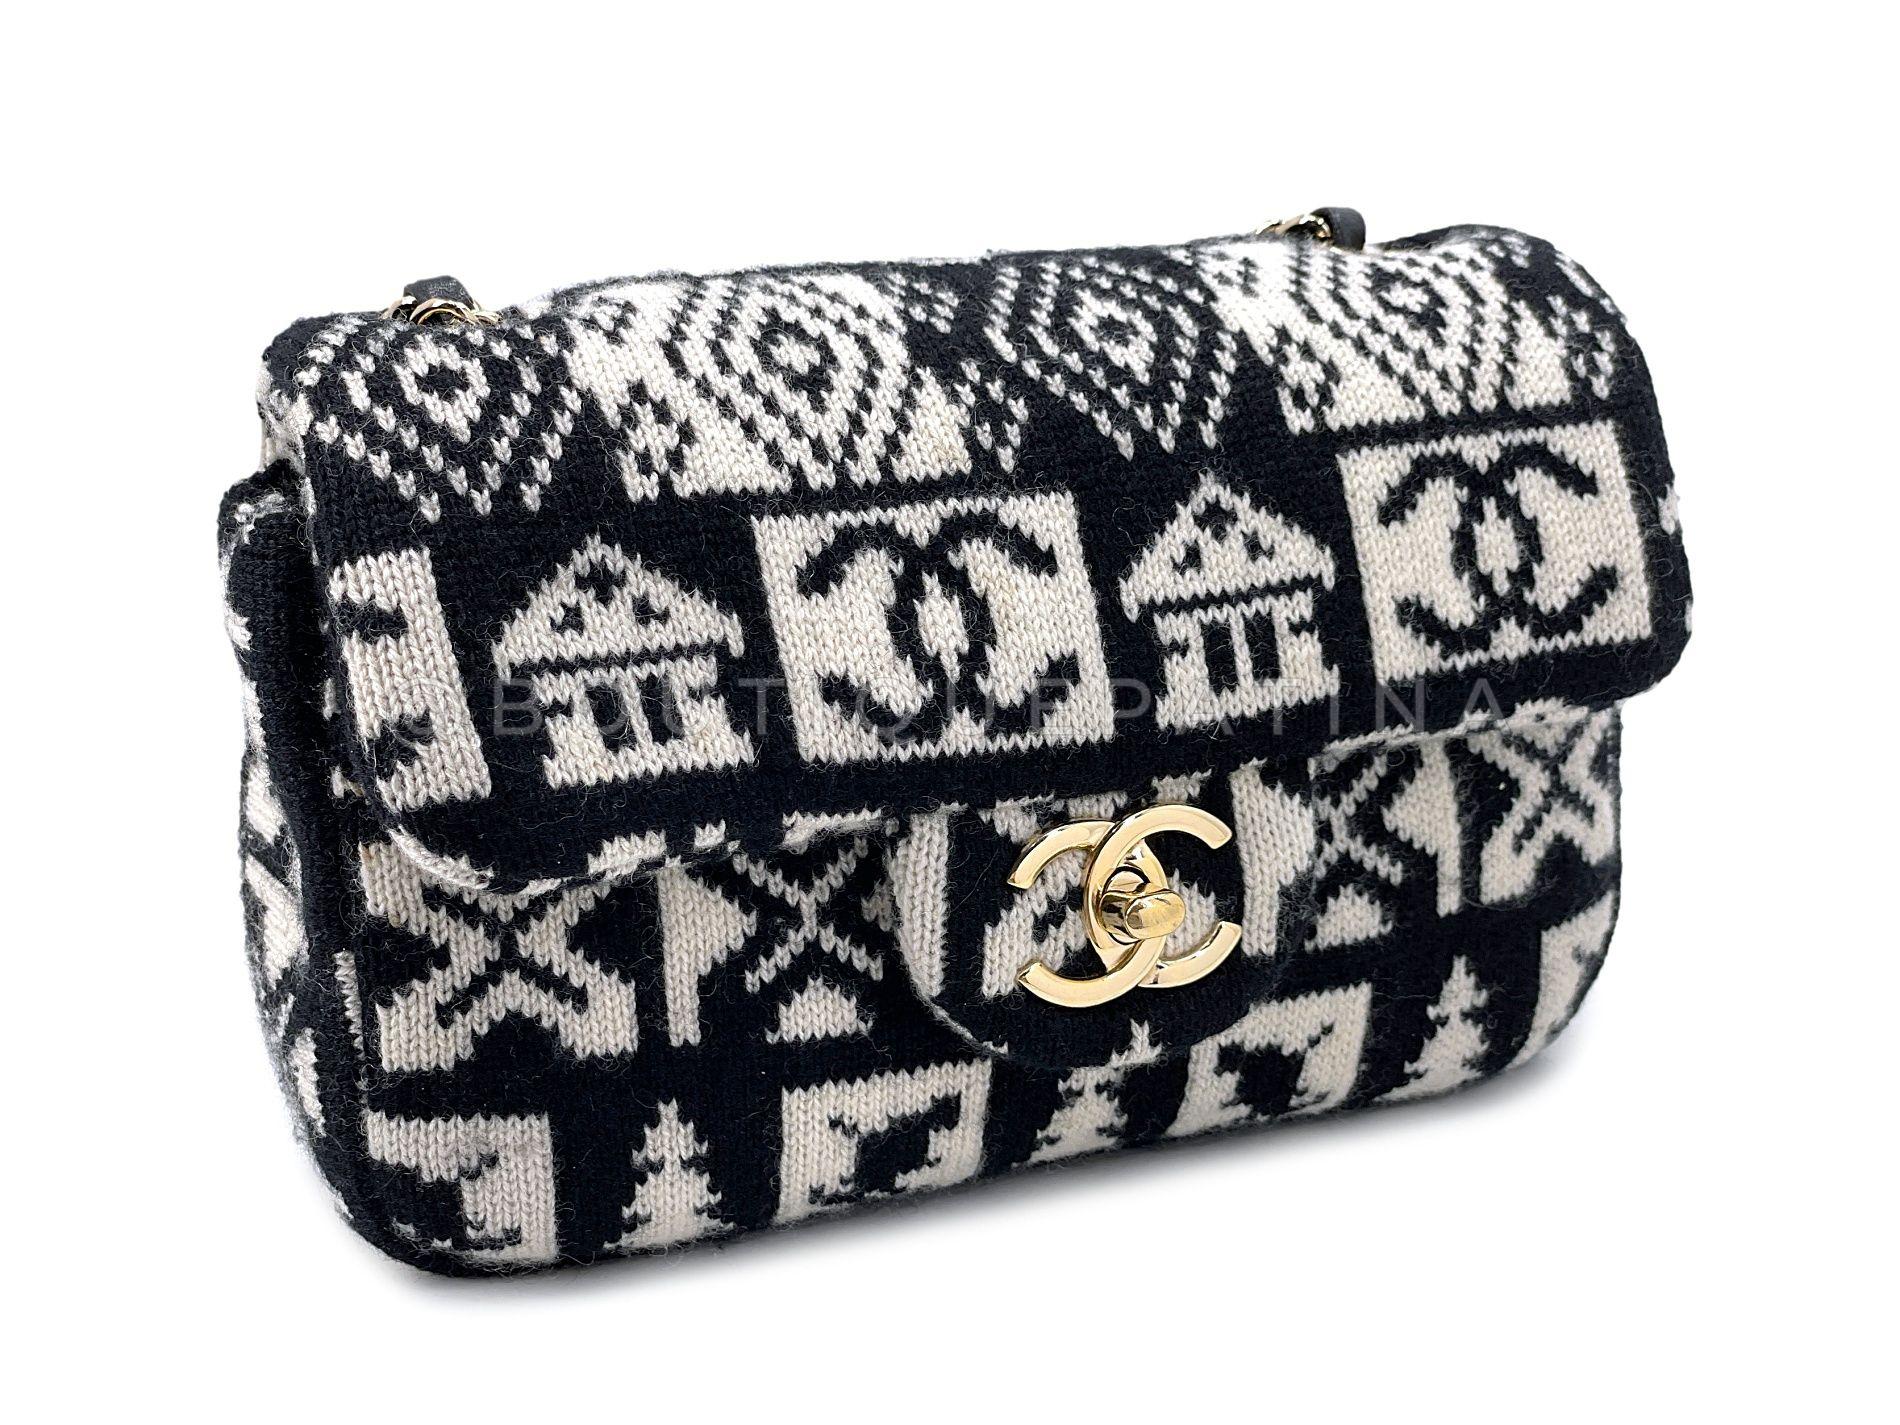 Chanel Coco Neige Rectangular Mini Flap Bag Cashmere Knit 68052 In Excellent Condition For Sale In Costa Mesa, CA